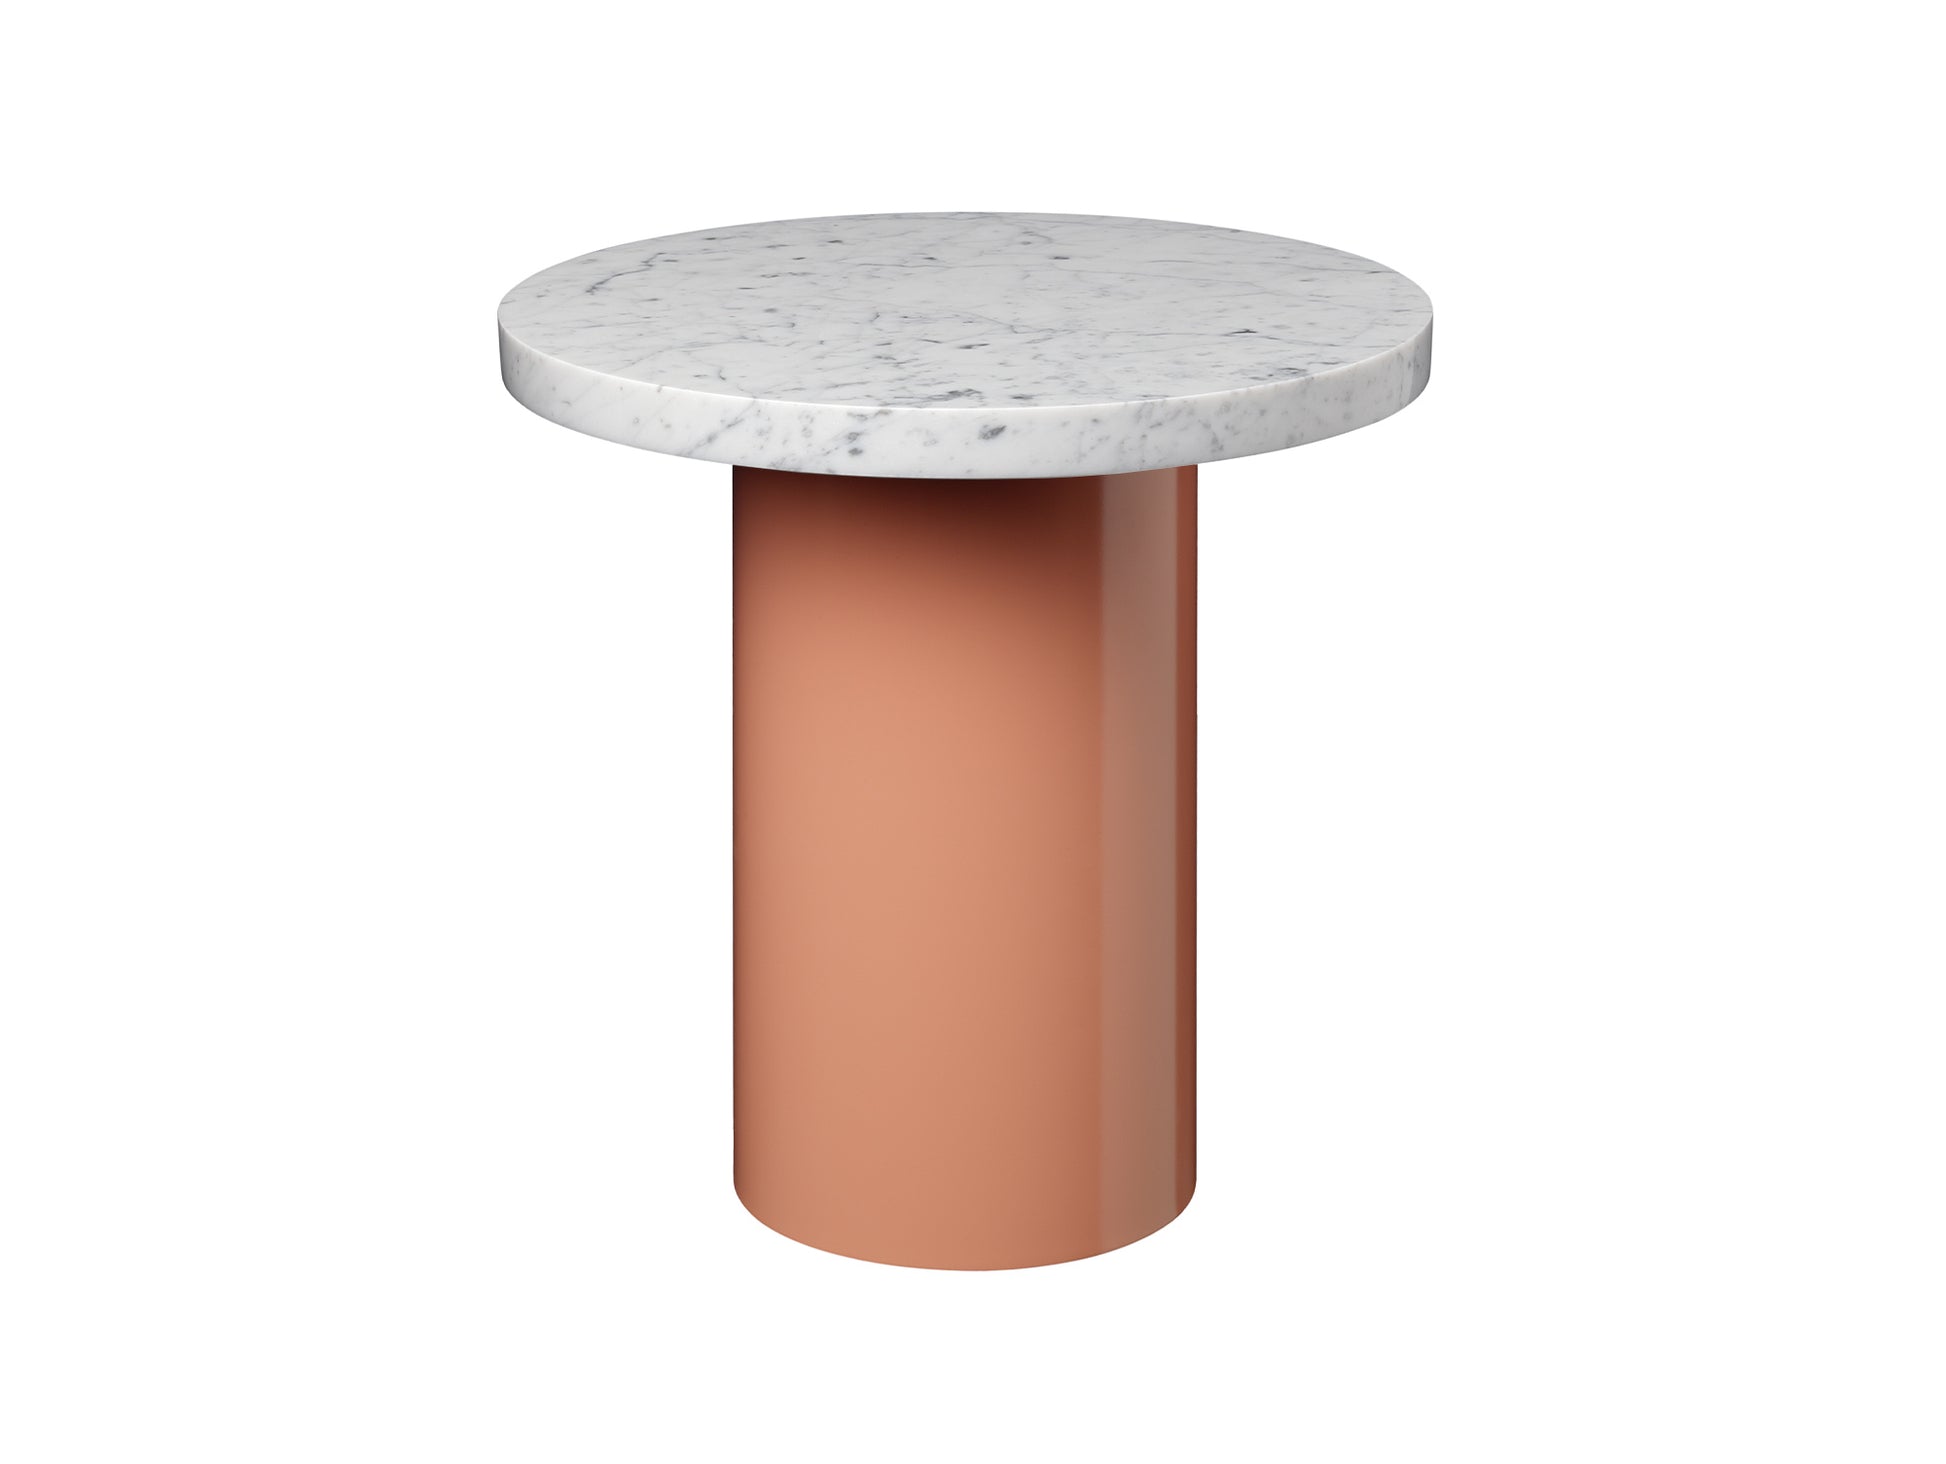 CT09 Enoki Side Table by e15 - D 40 H 40 / Bianco Carrara Marble Tabletop / Beige Red Steel Base